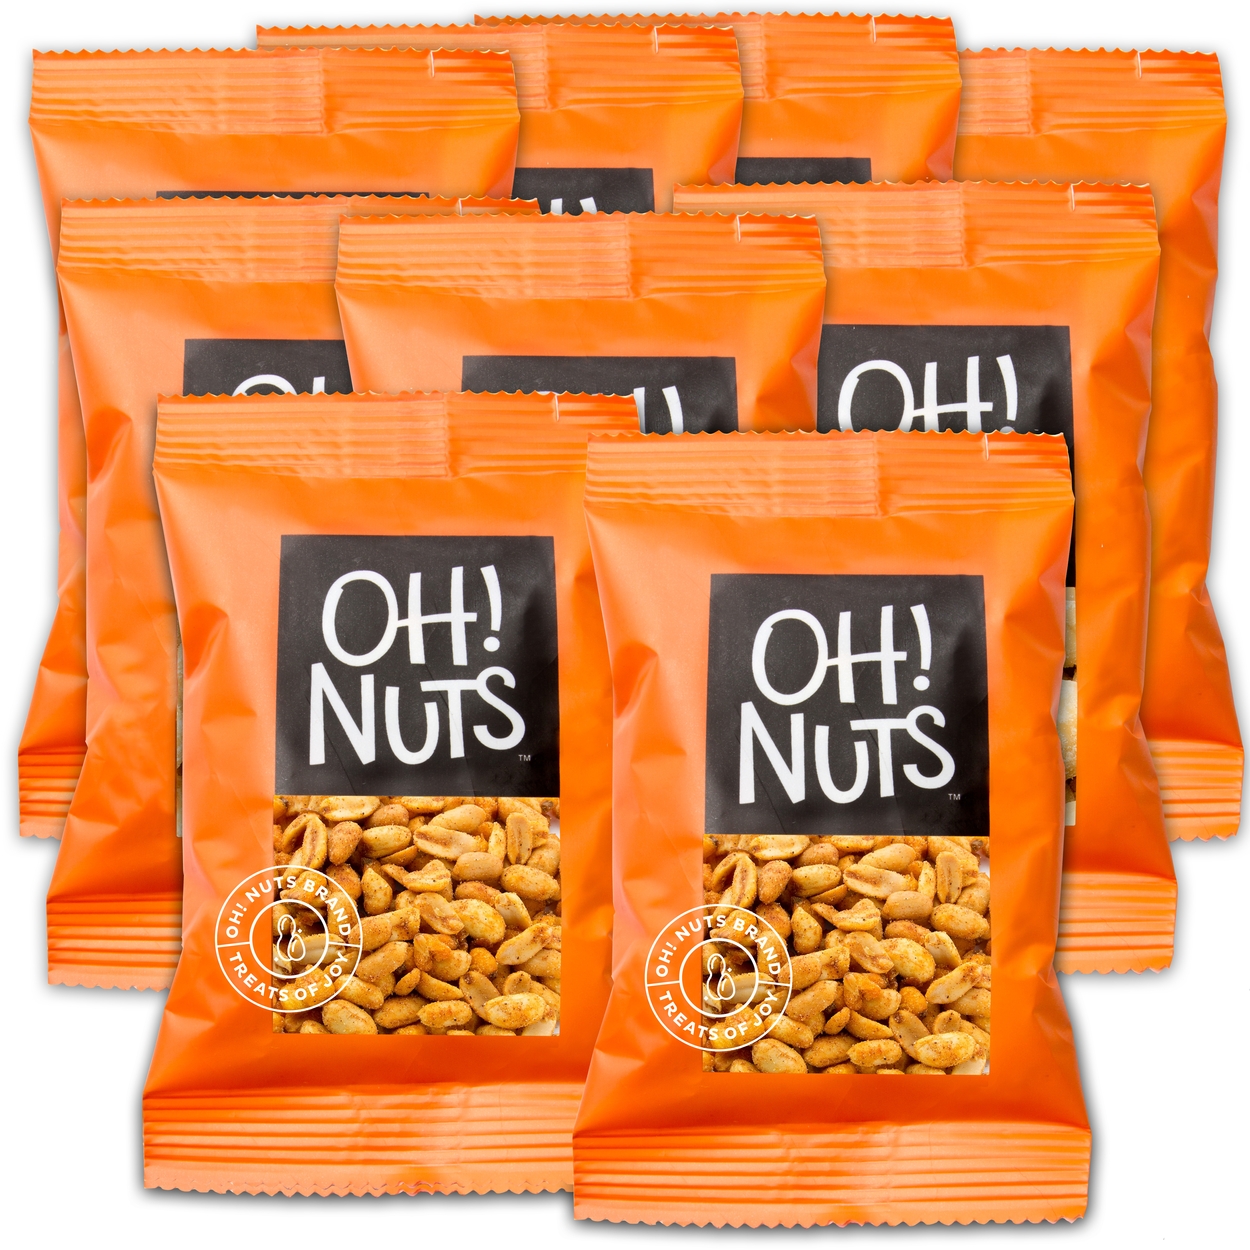 Spicy Chef's Blend Peanuts Snack Packs 12 CT • Single Serve Nuts